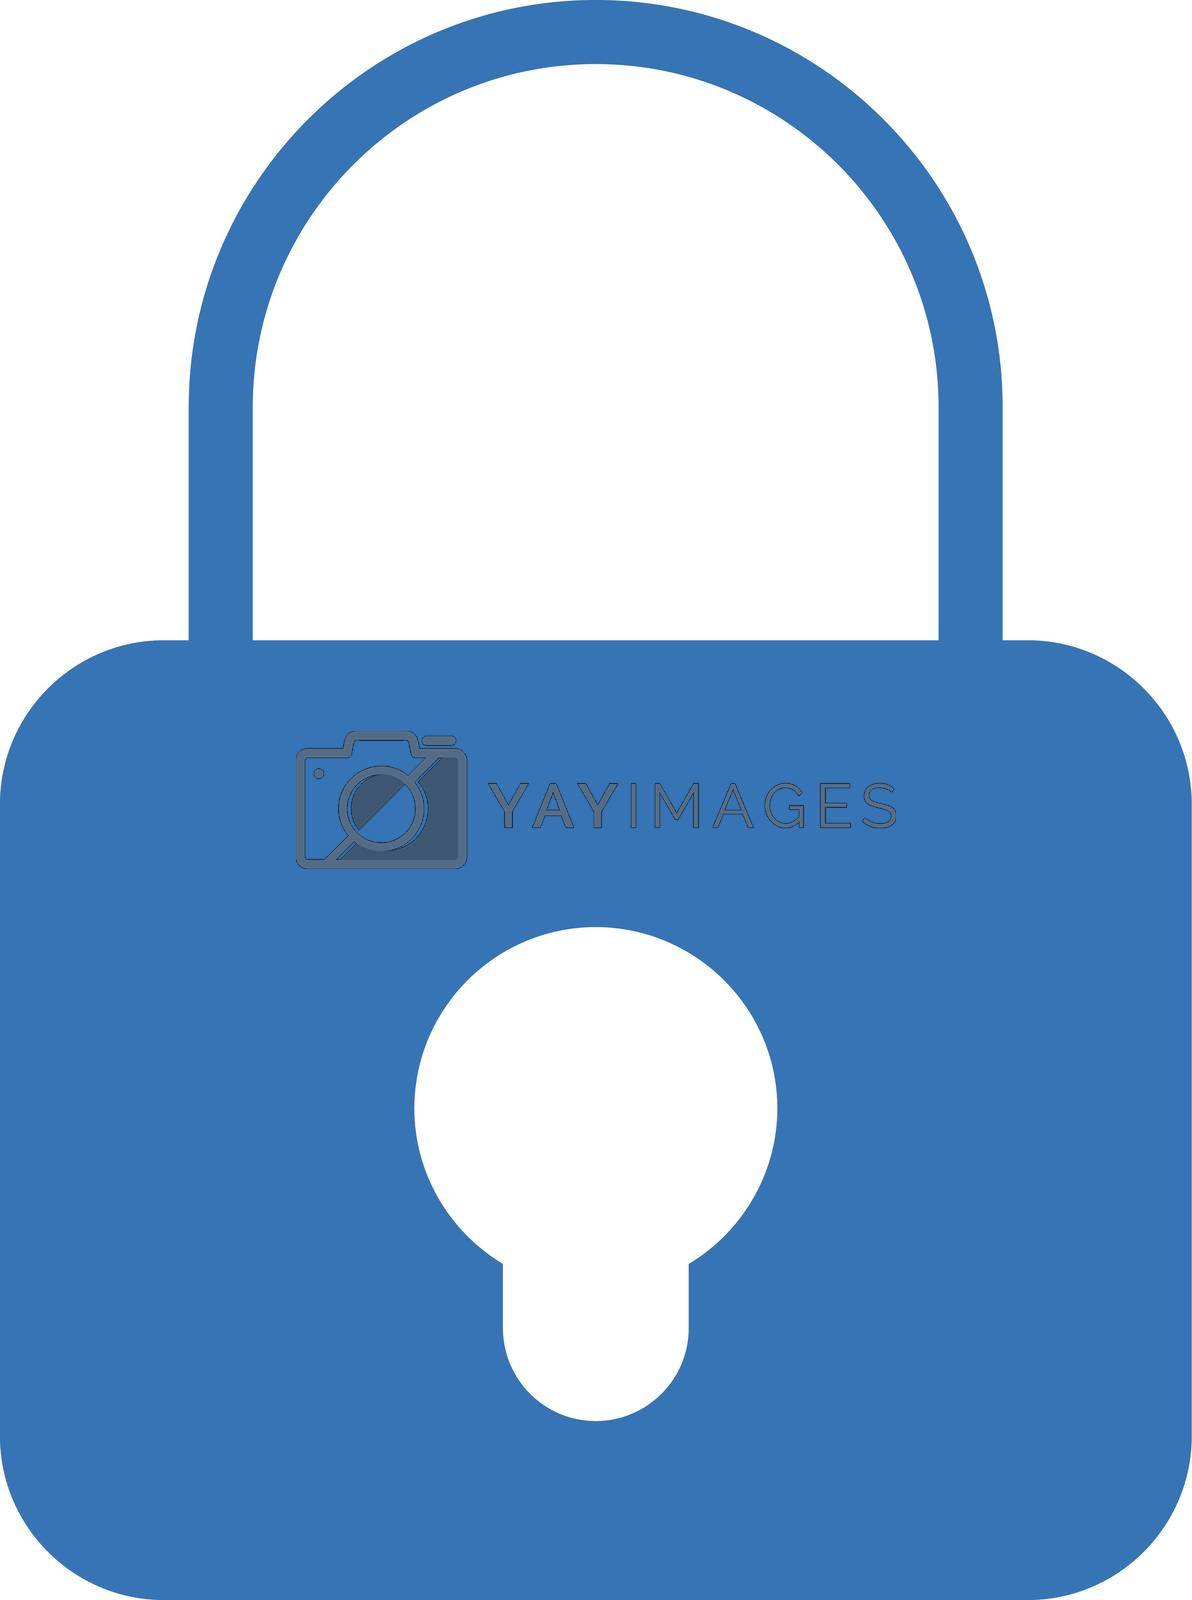 Royalty free image of lock by FlaticonsDesign